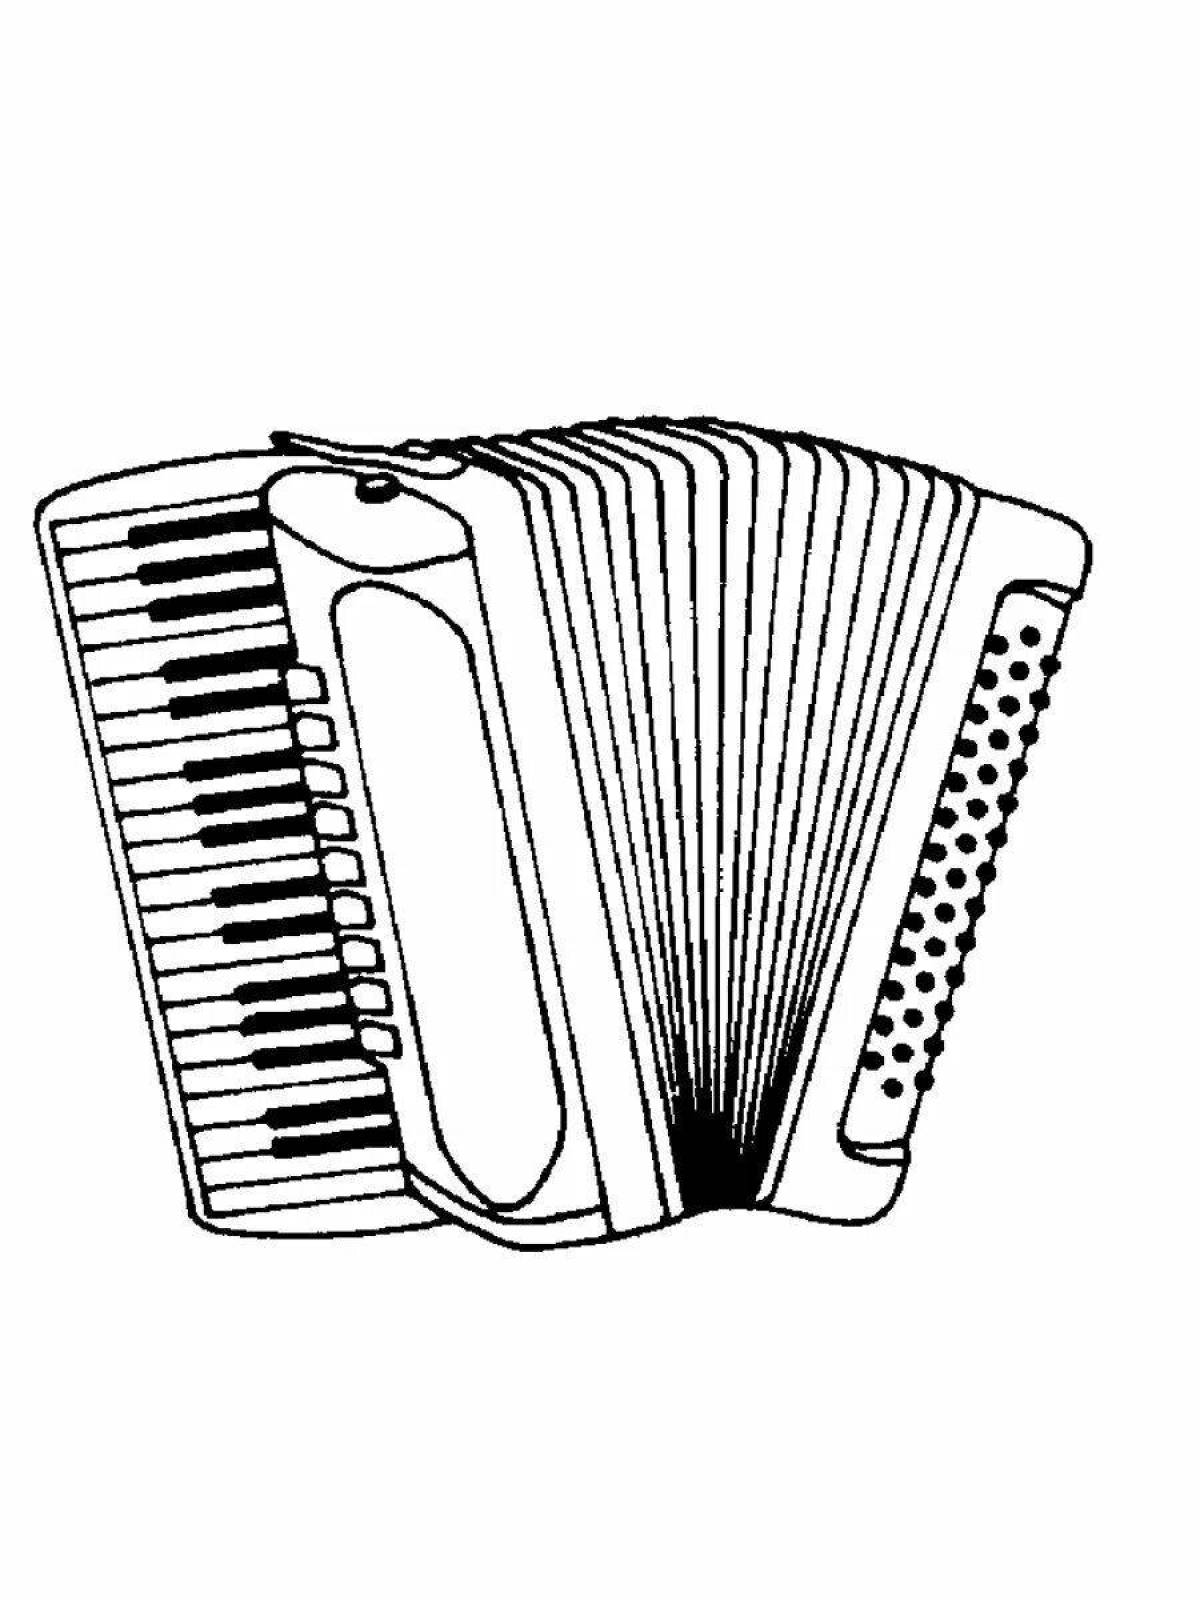 Living accordion coloring book for kids